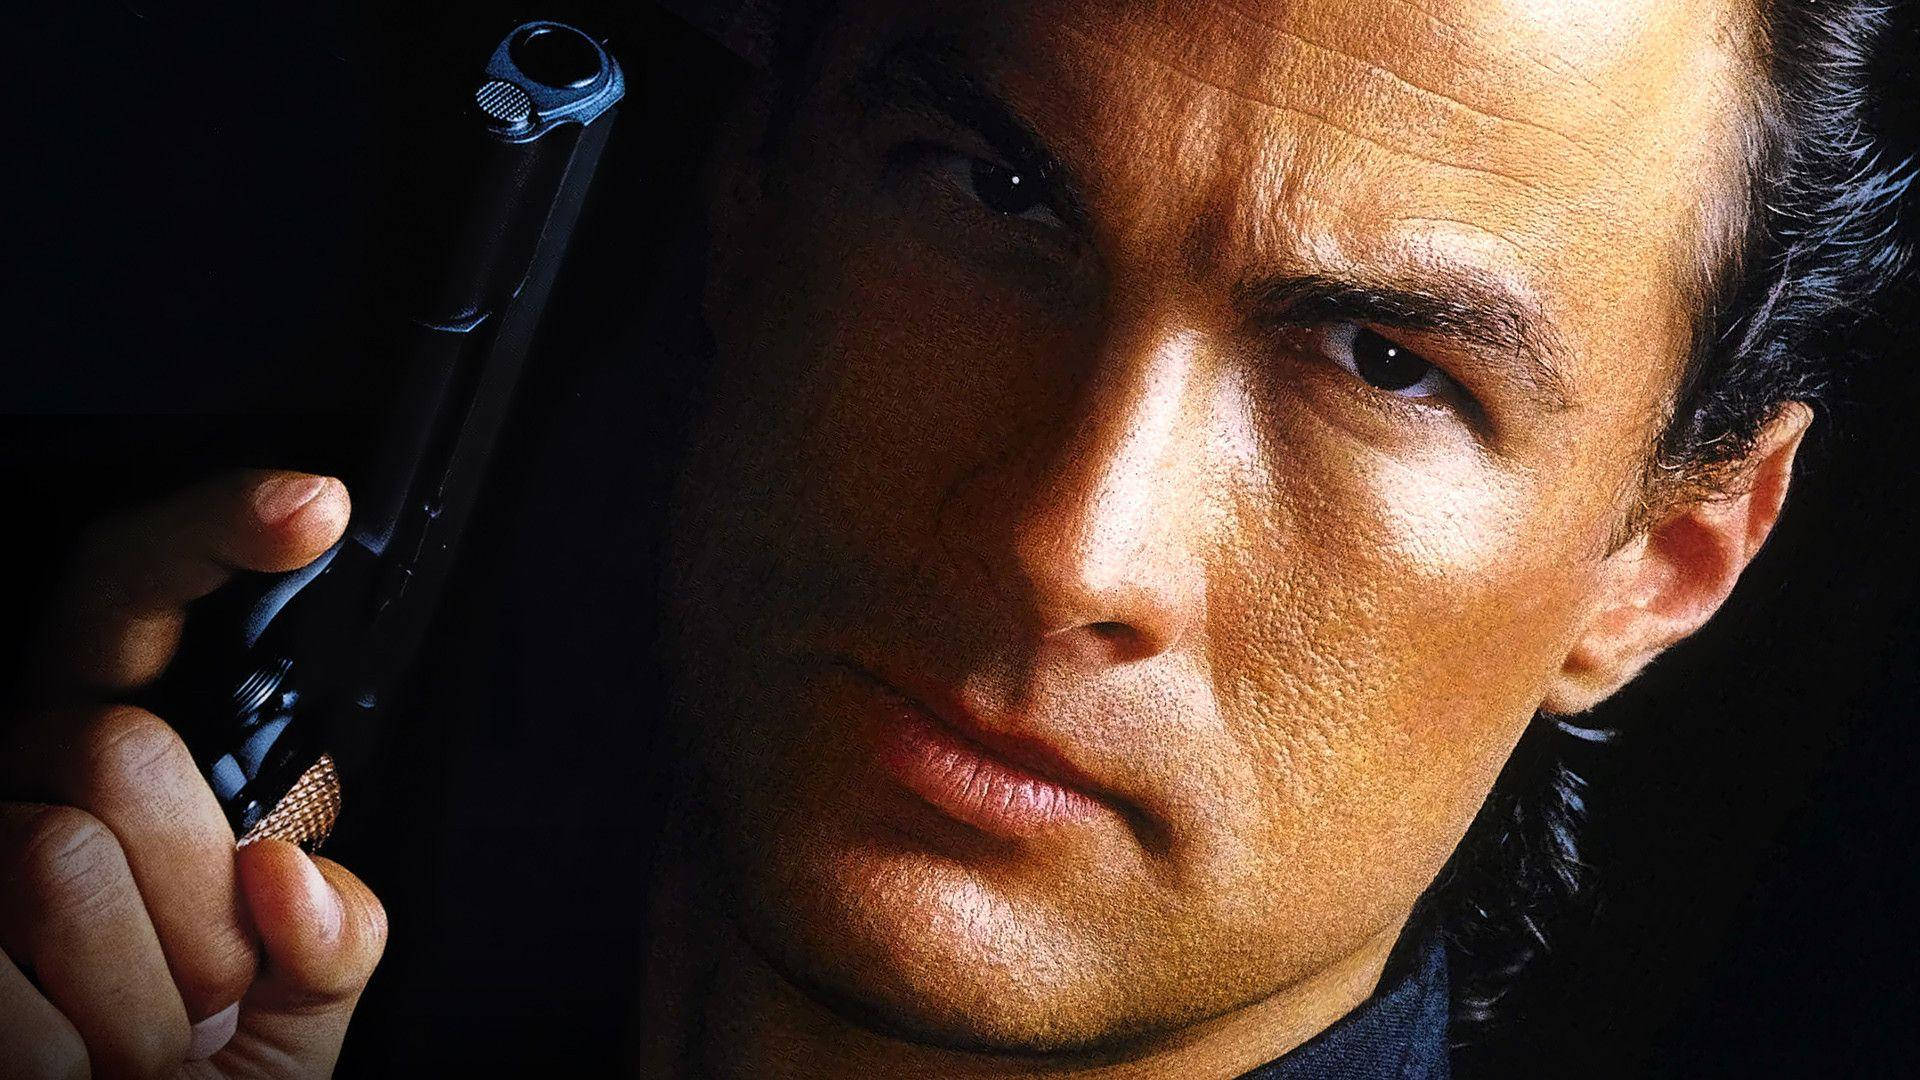 Steven Seagal in 'Above The Law' eye-catching moment Wallpaper